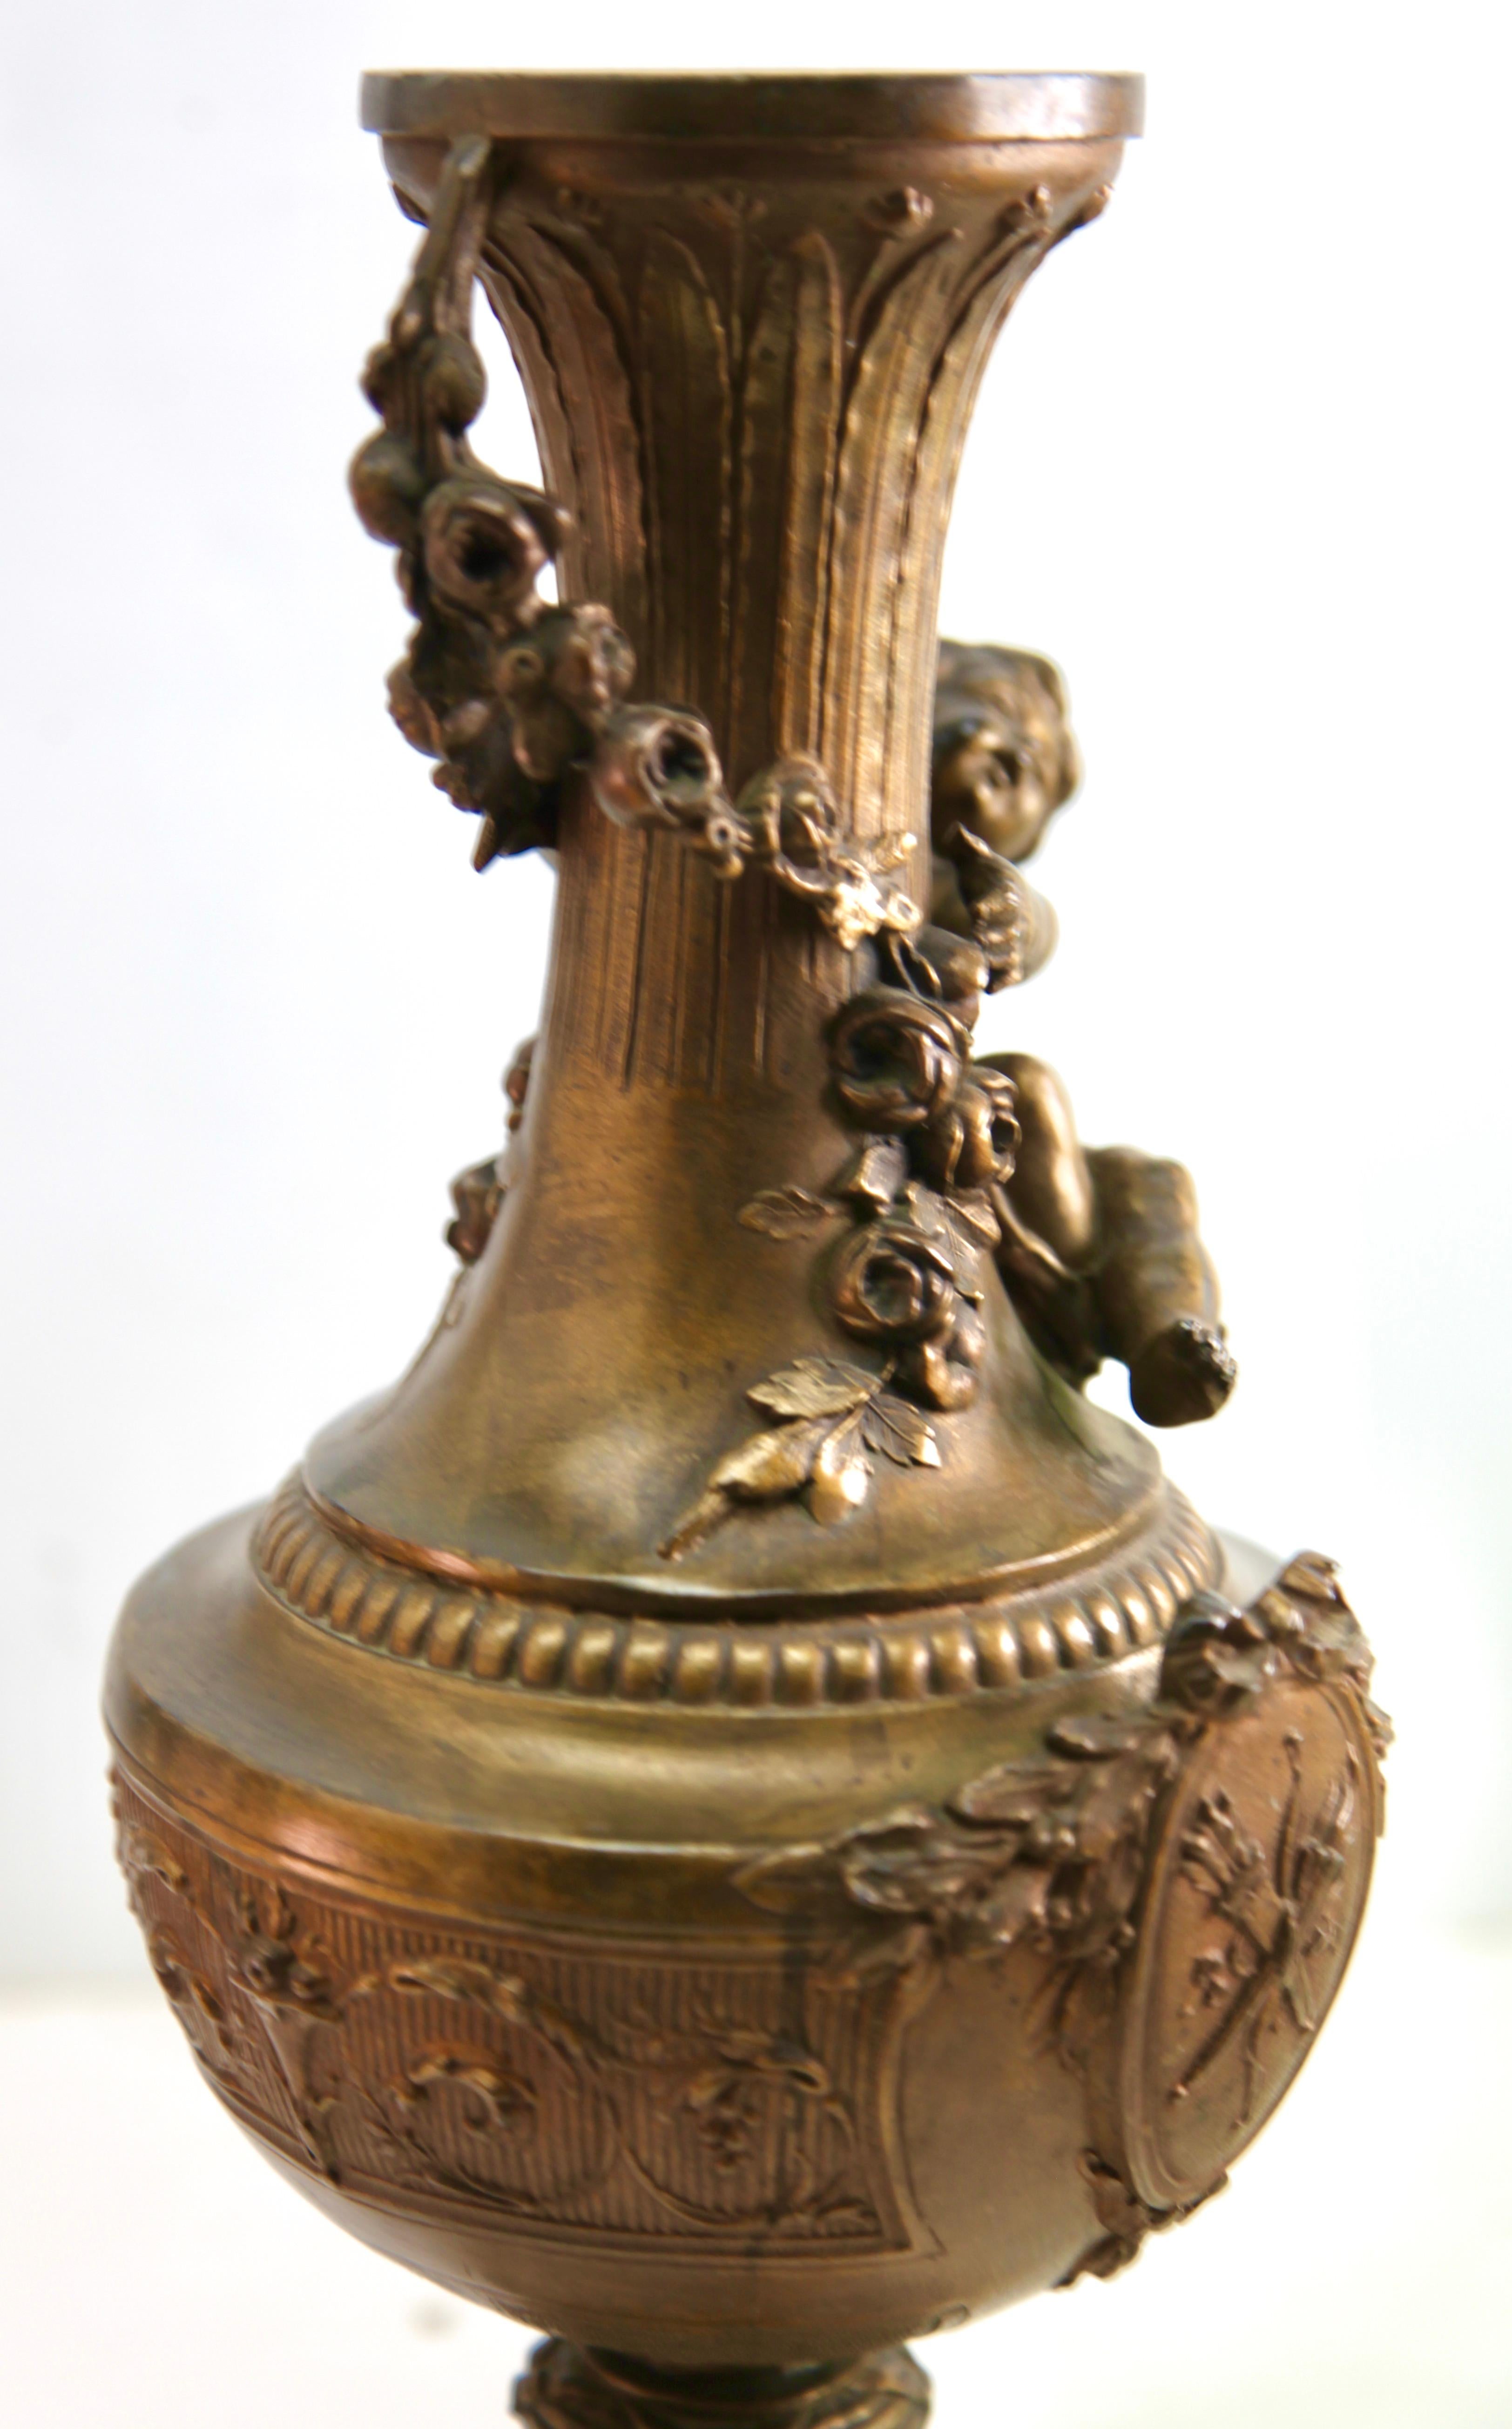 Pair of Ornamented Vases or Lamps with Little Angels and Richly Decorated For Sale 3